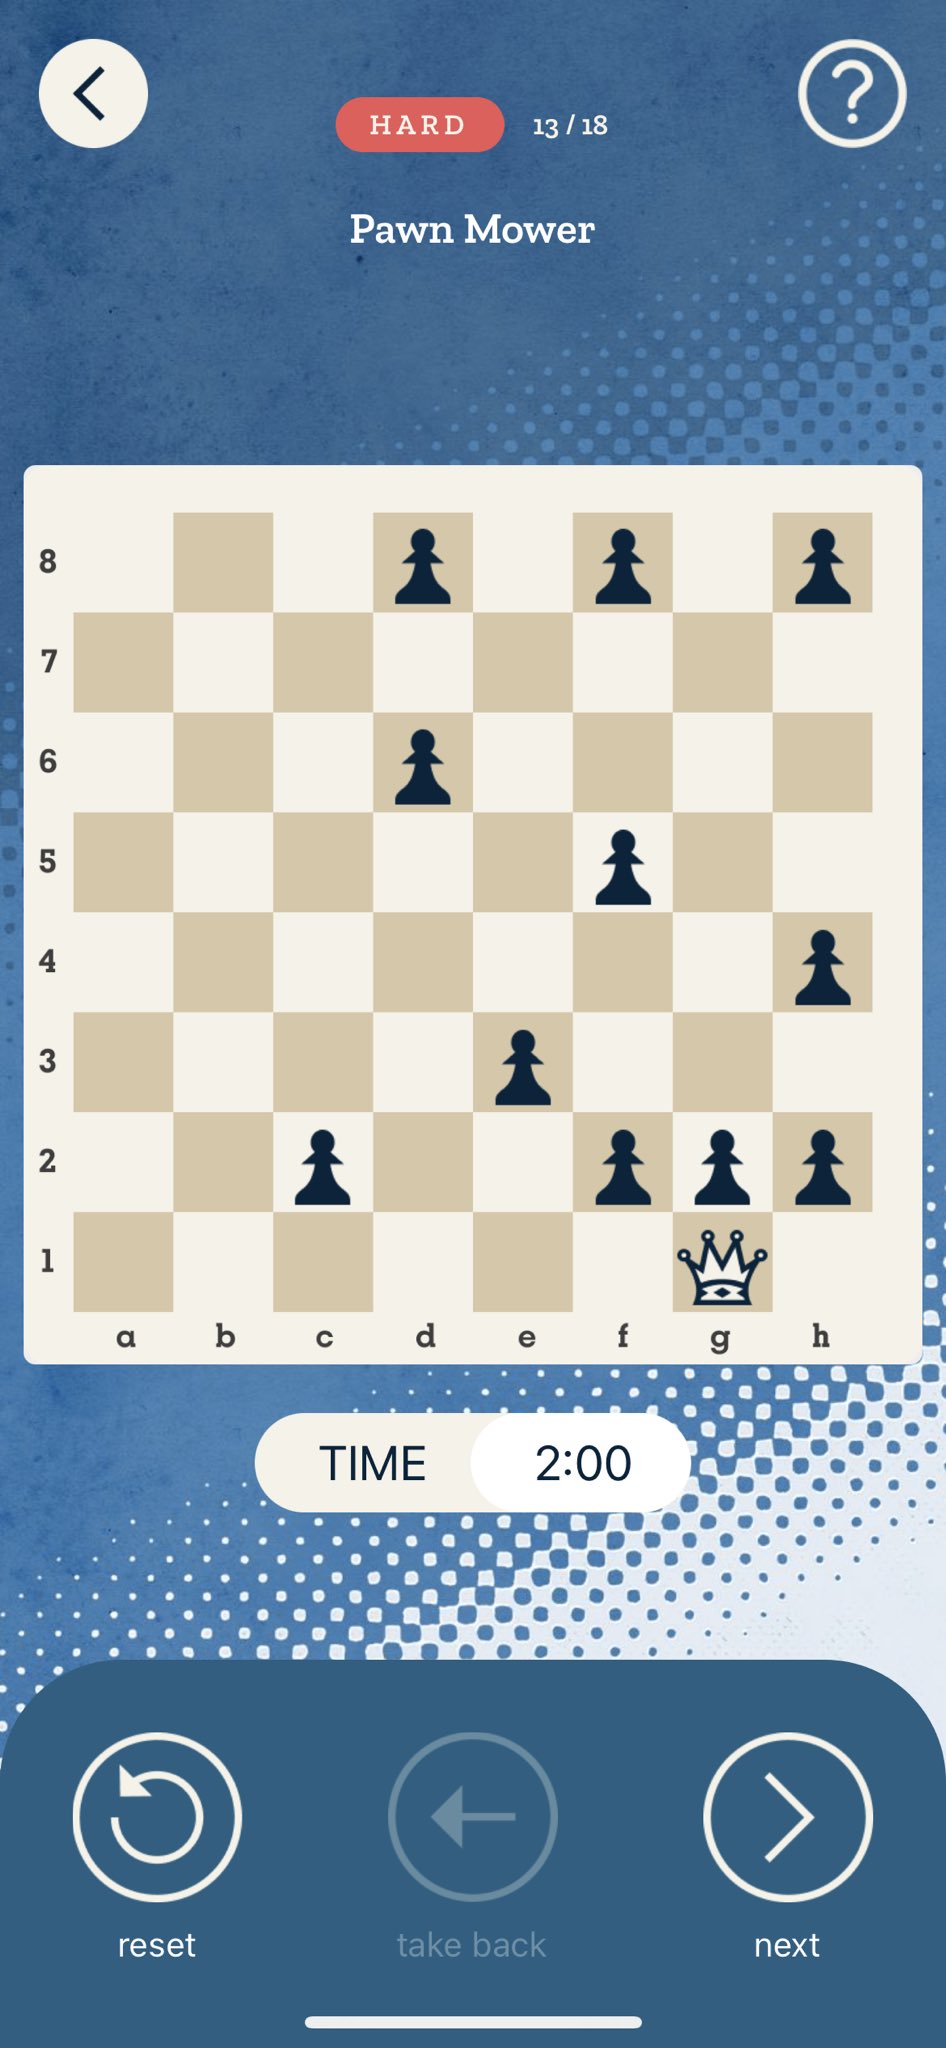 Maurice Ashley on X: Visualization training: How can the queen capture all  11 pawns in exactly 11 moves? The pawns do not move or protect each other.  (From my app Maurice Ashley